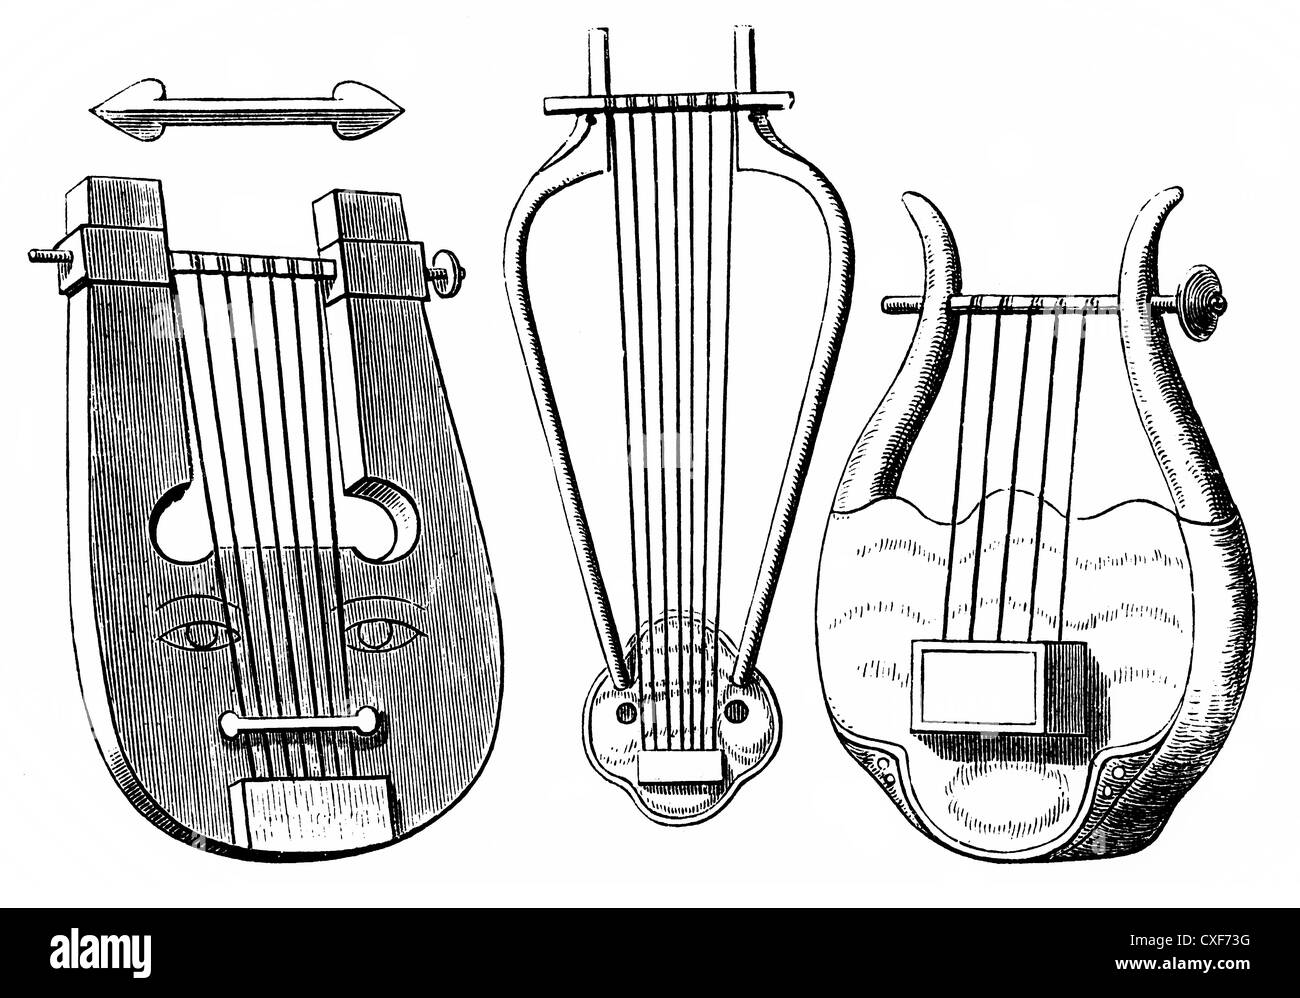 Greek stringed instruments or chordophones of antiquity, lyre, psaltery or lyre and chelys, Stock Photo